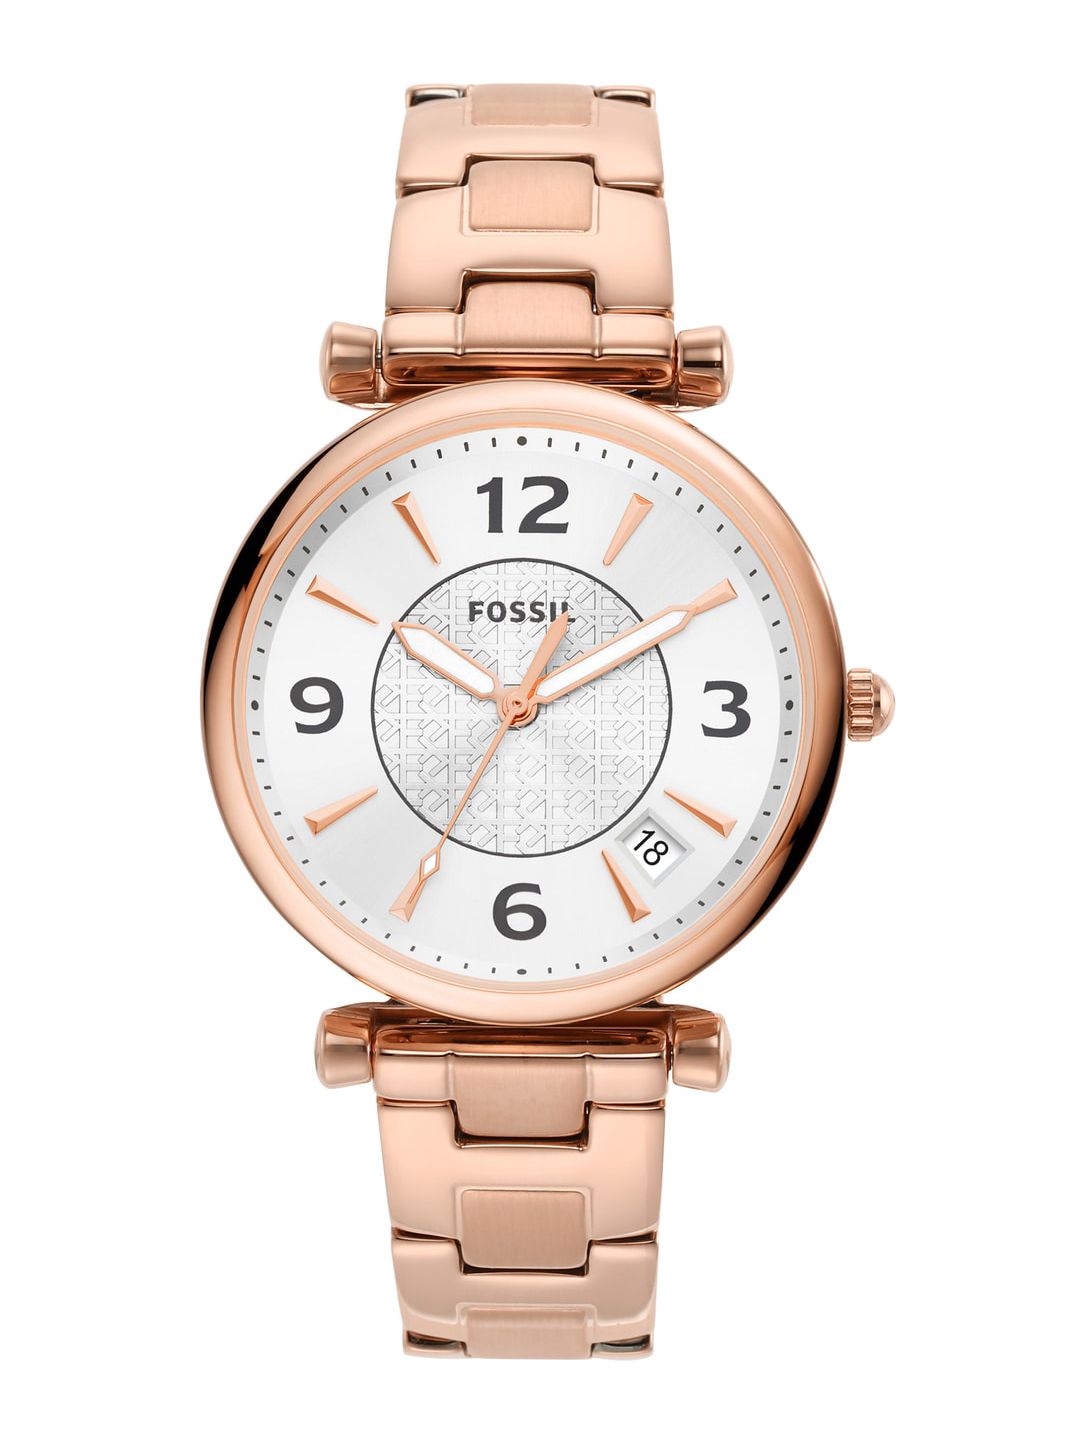 Fossil Women Silver-Toned Printed Dial & Rose Gold-Plated Stainless Steel Straps Analogue Watch ES5158 Price in India